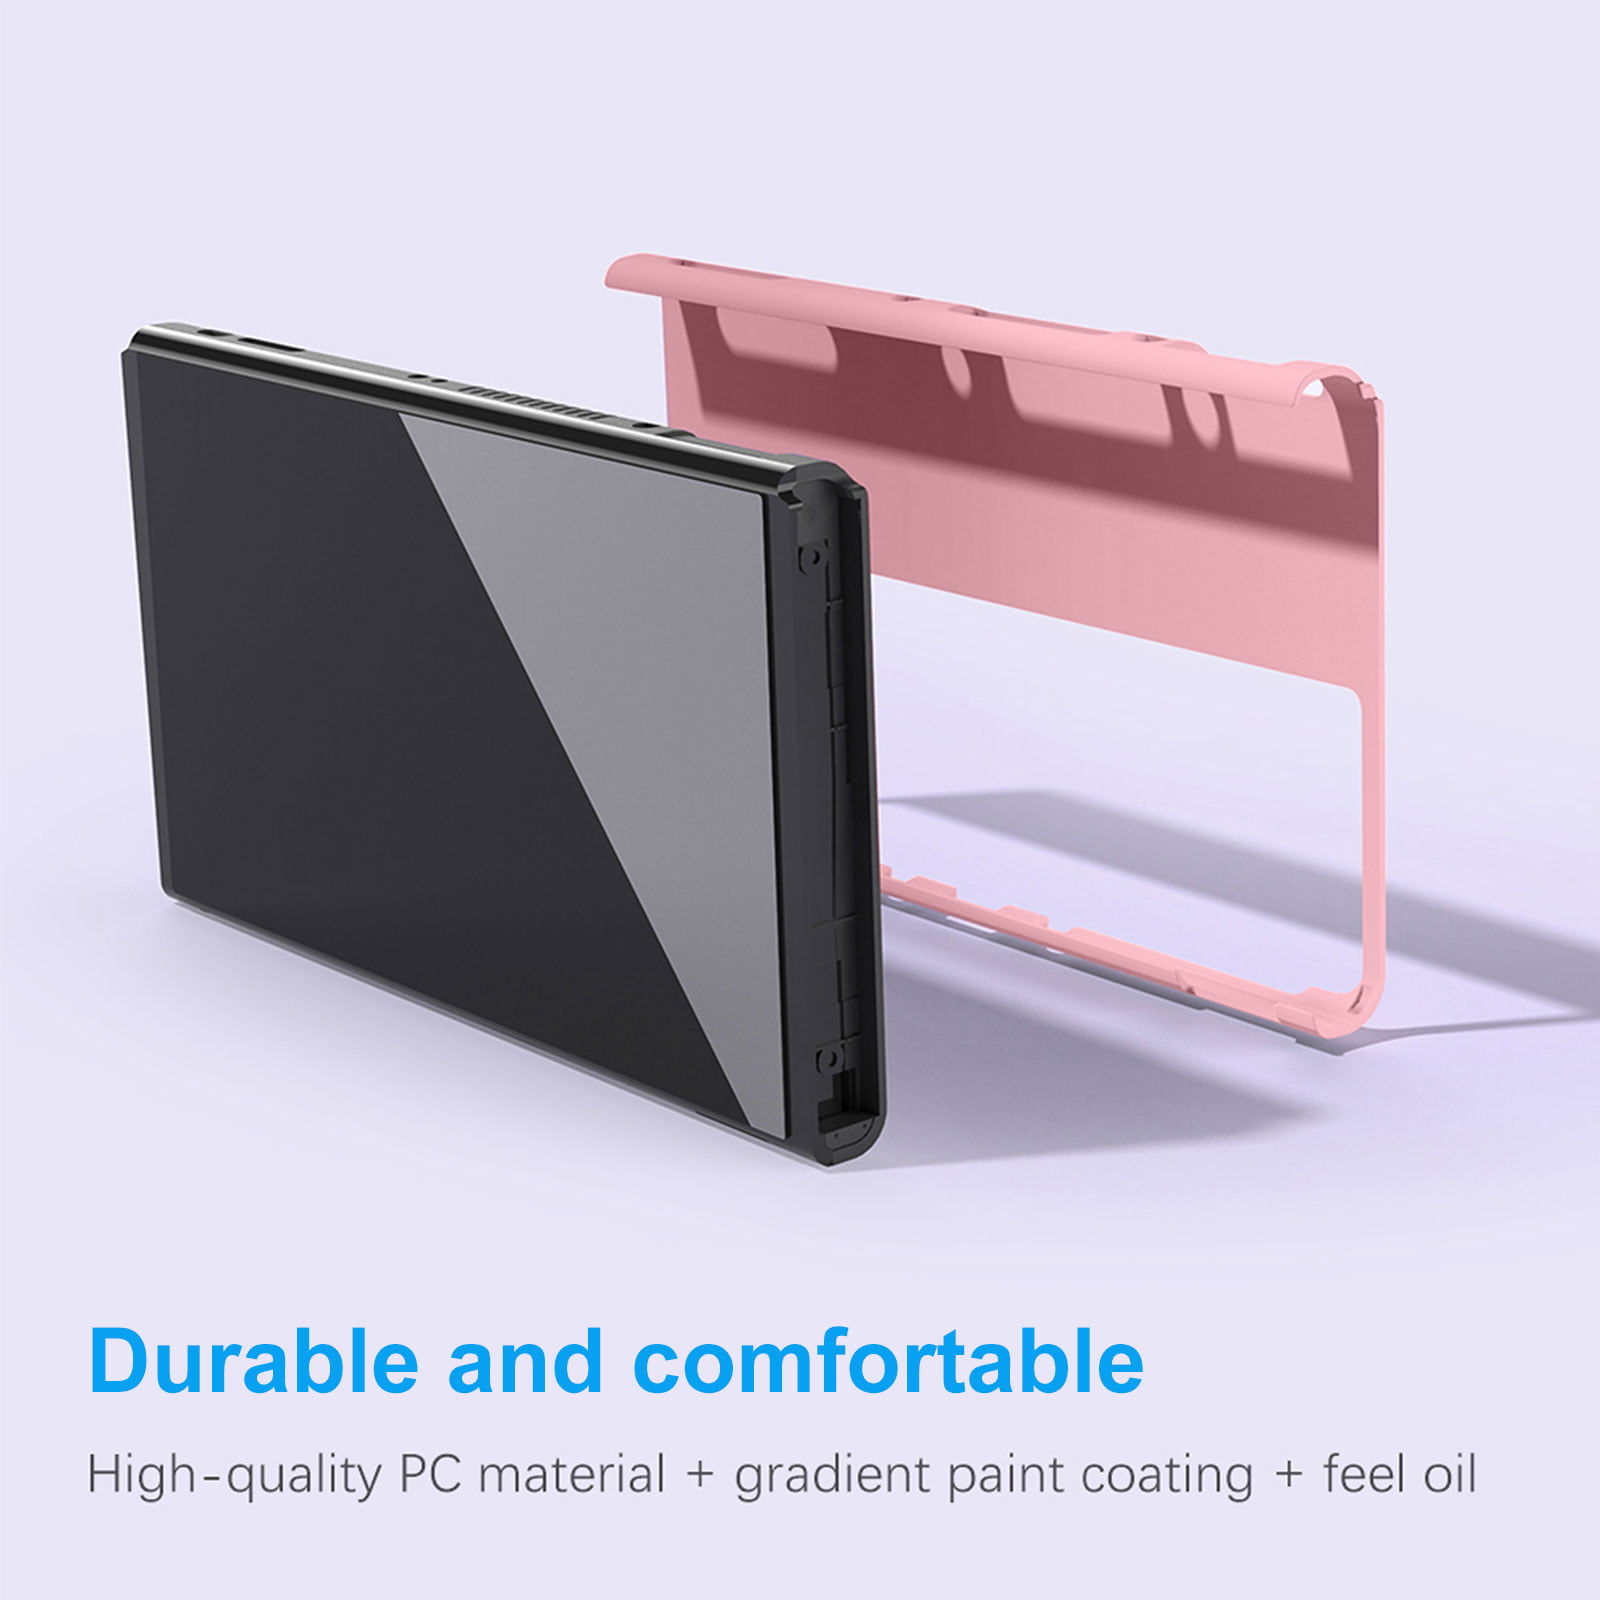 [Improved Version] Dockable Clear Case for Nintendo Switch OLED 2021, FANPL  Protective Case Cover for Switch OLED and Joy Con Controller - Strong and